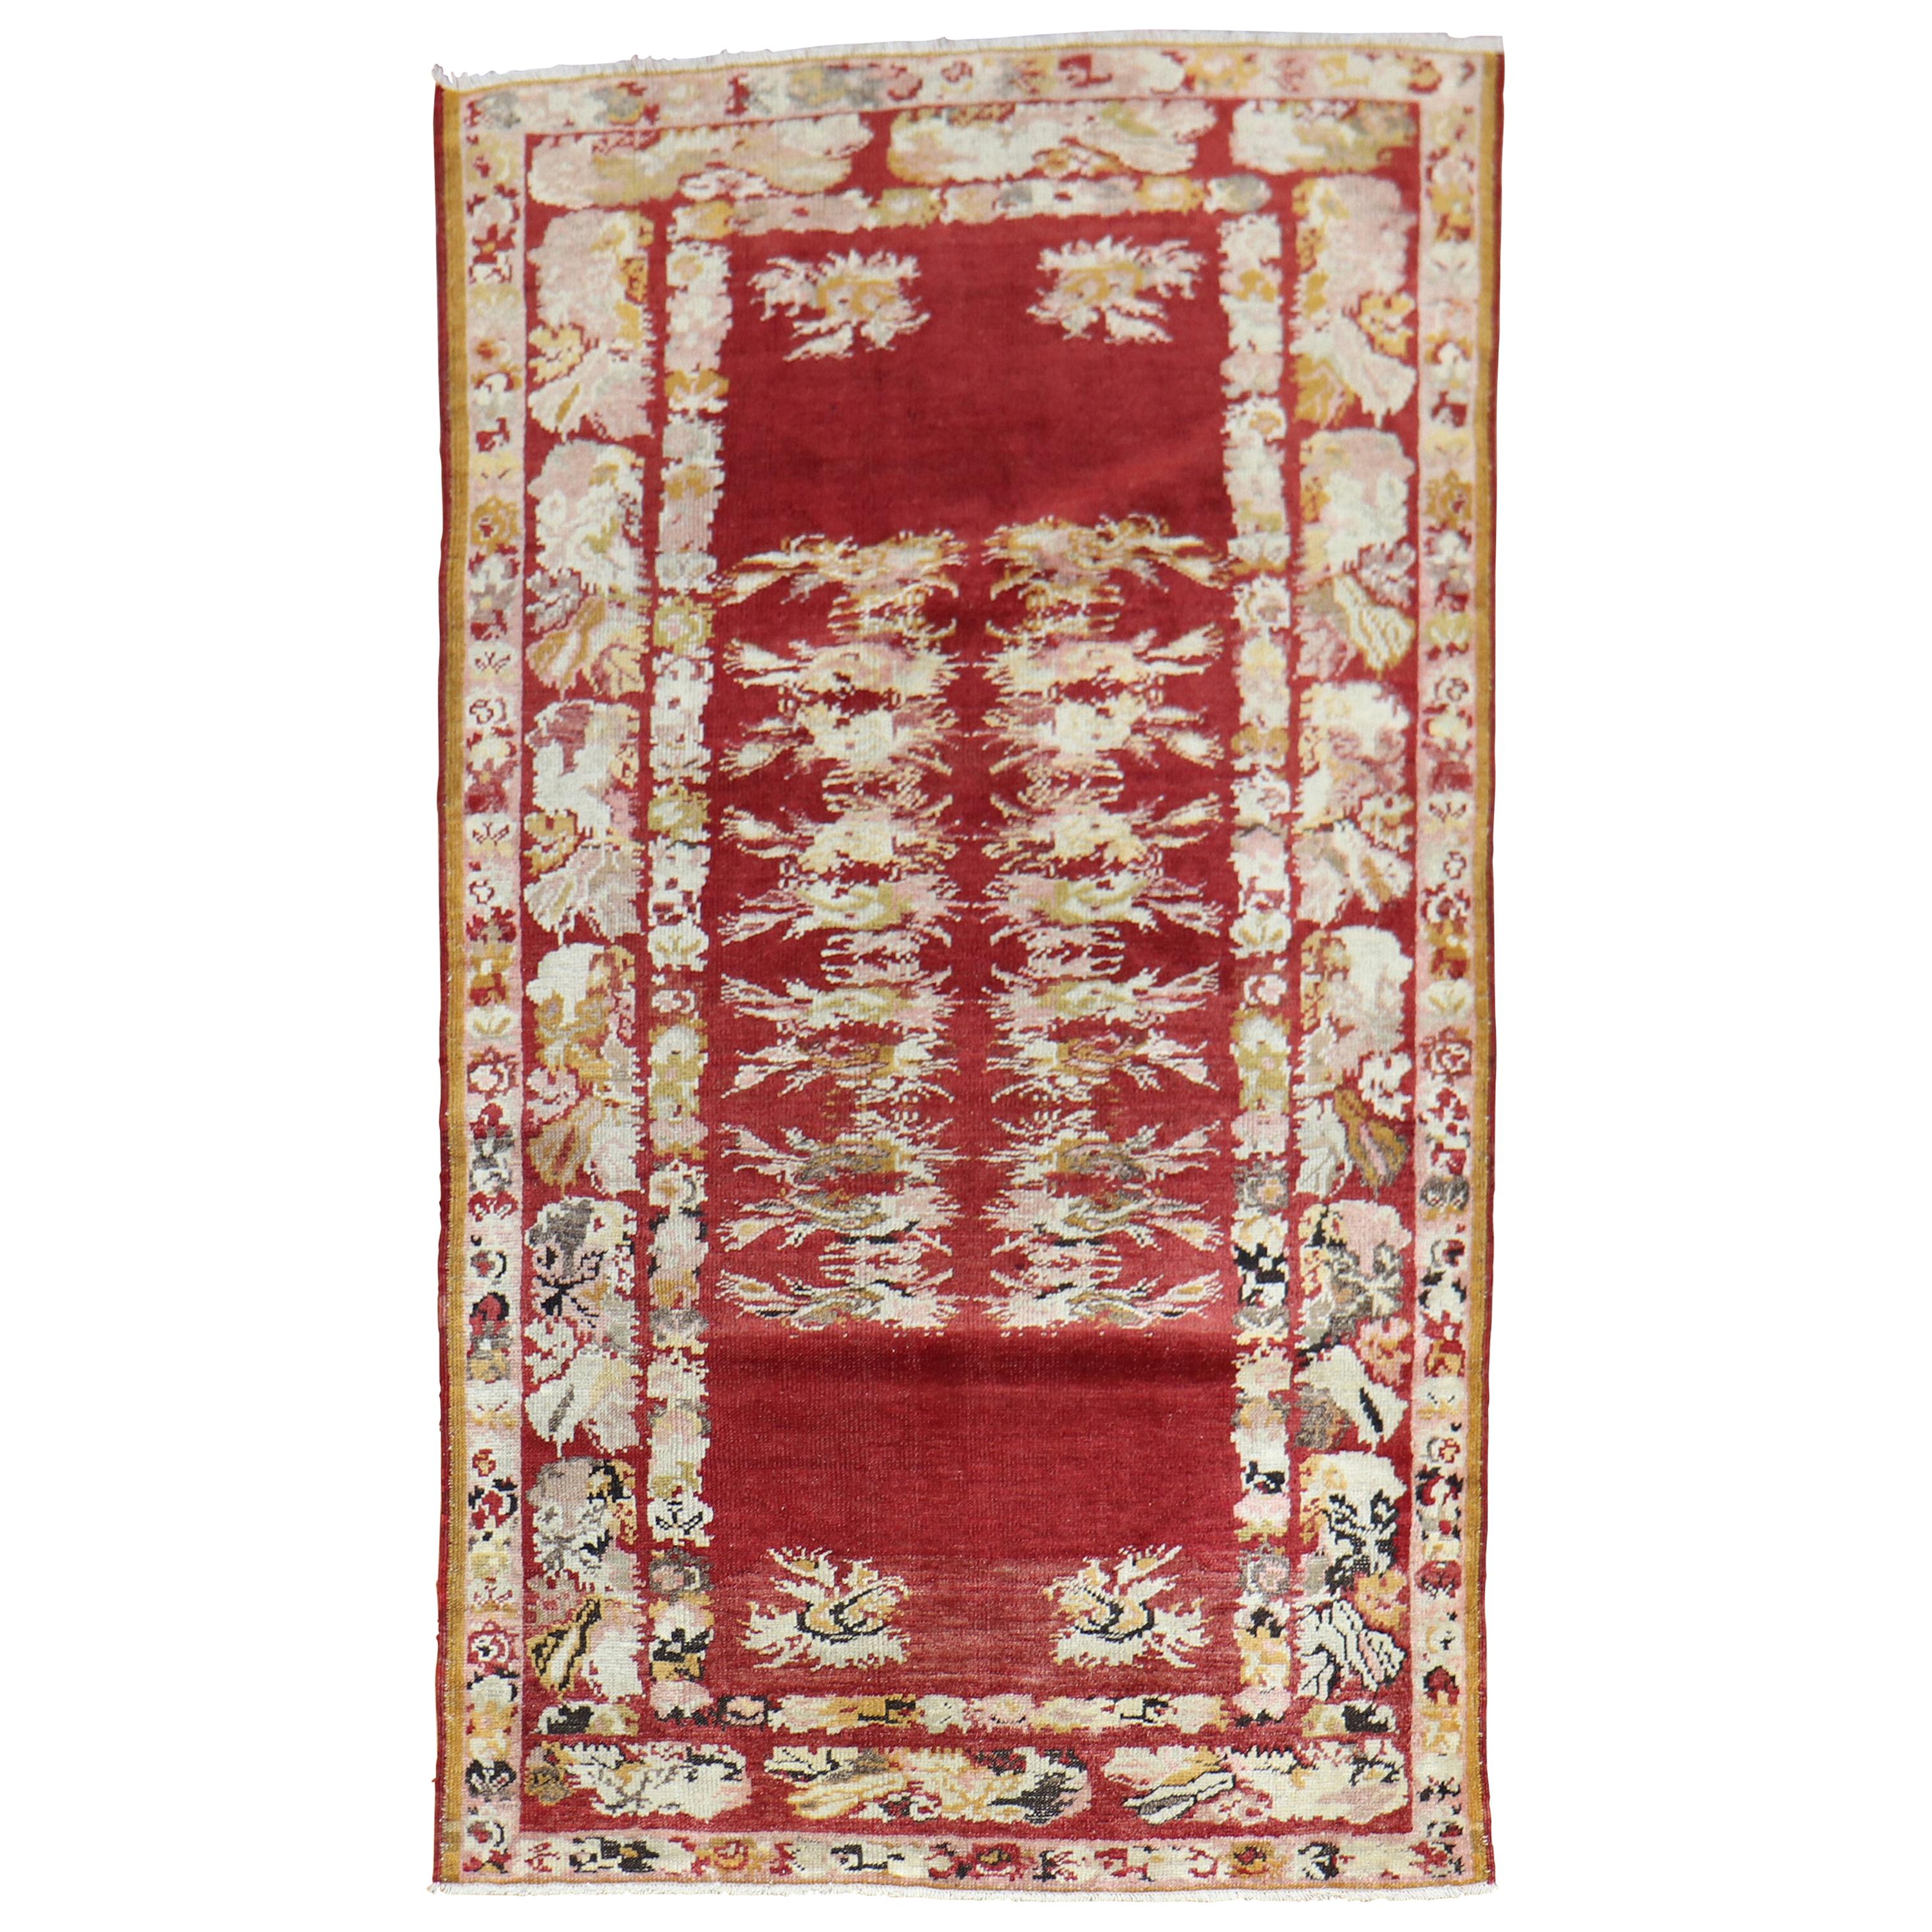 Cherry Red Antique Turkish Melas Rug, Early 20th Century